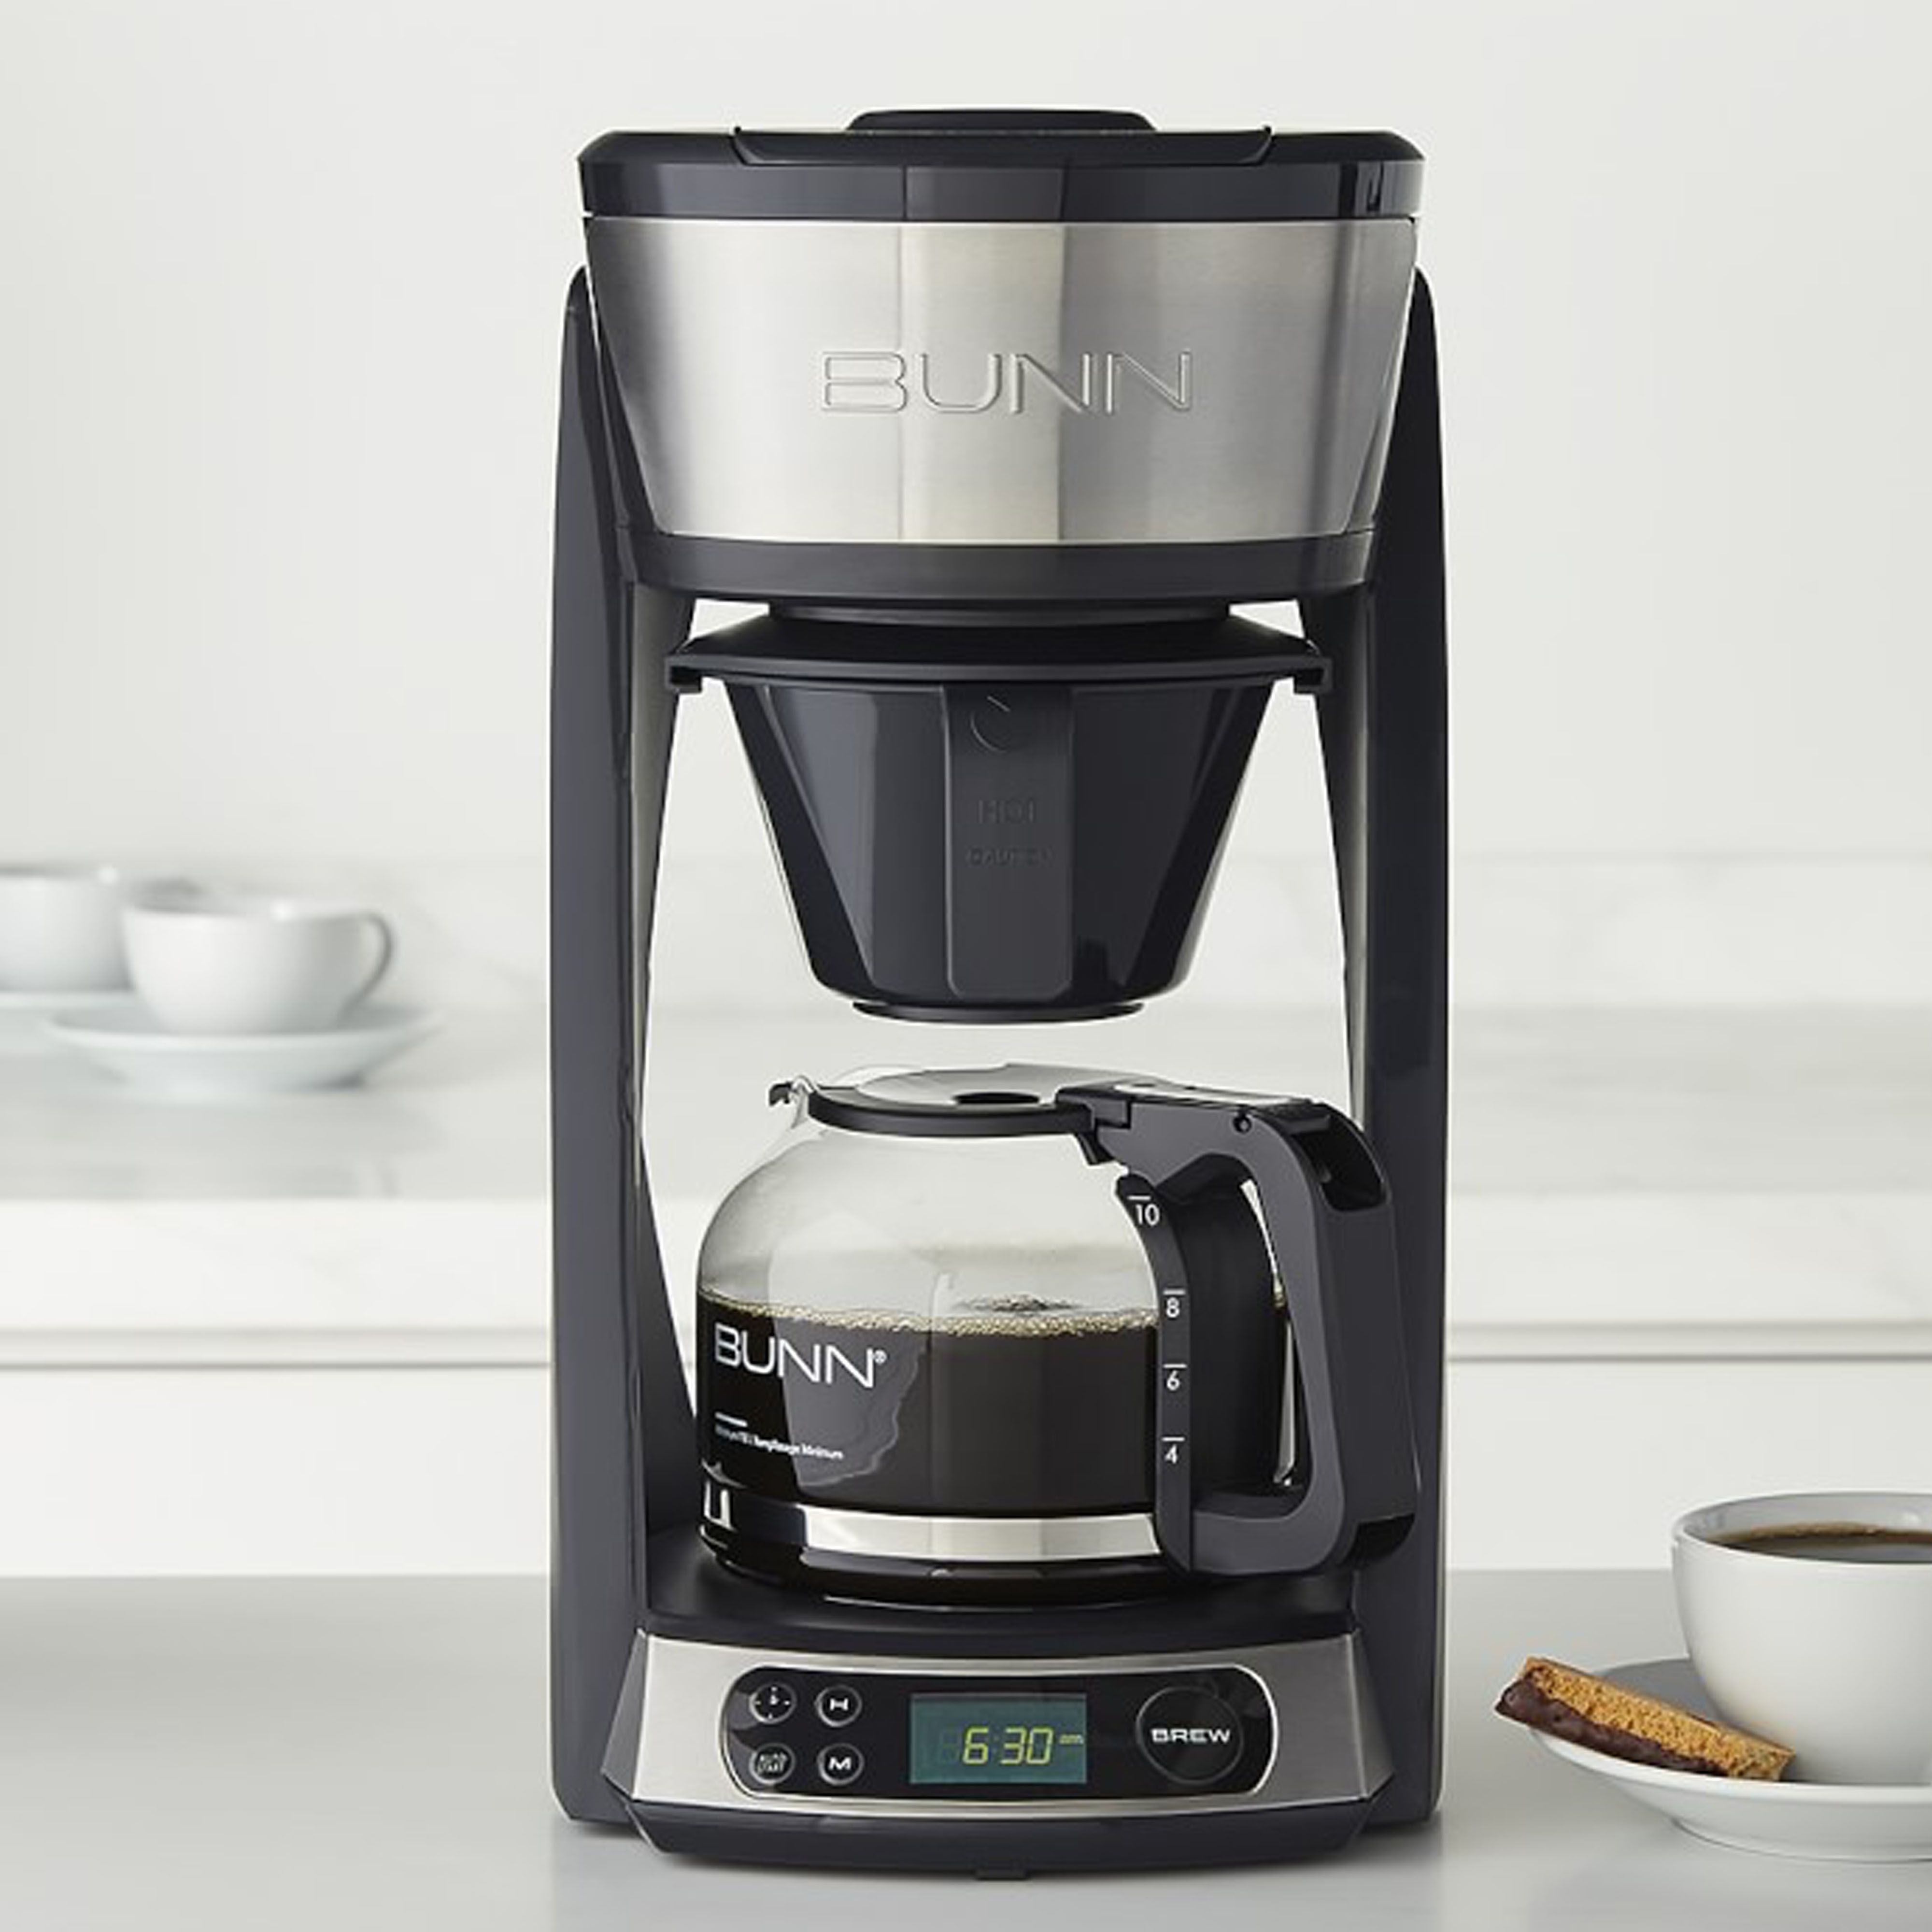 Bunn HB Coffeemaker Review, Price and Features - Pros and Cons of